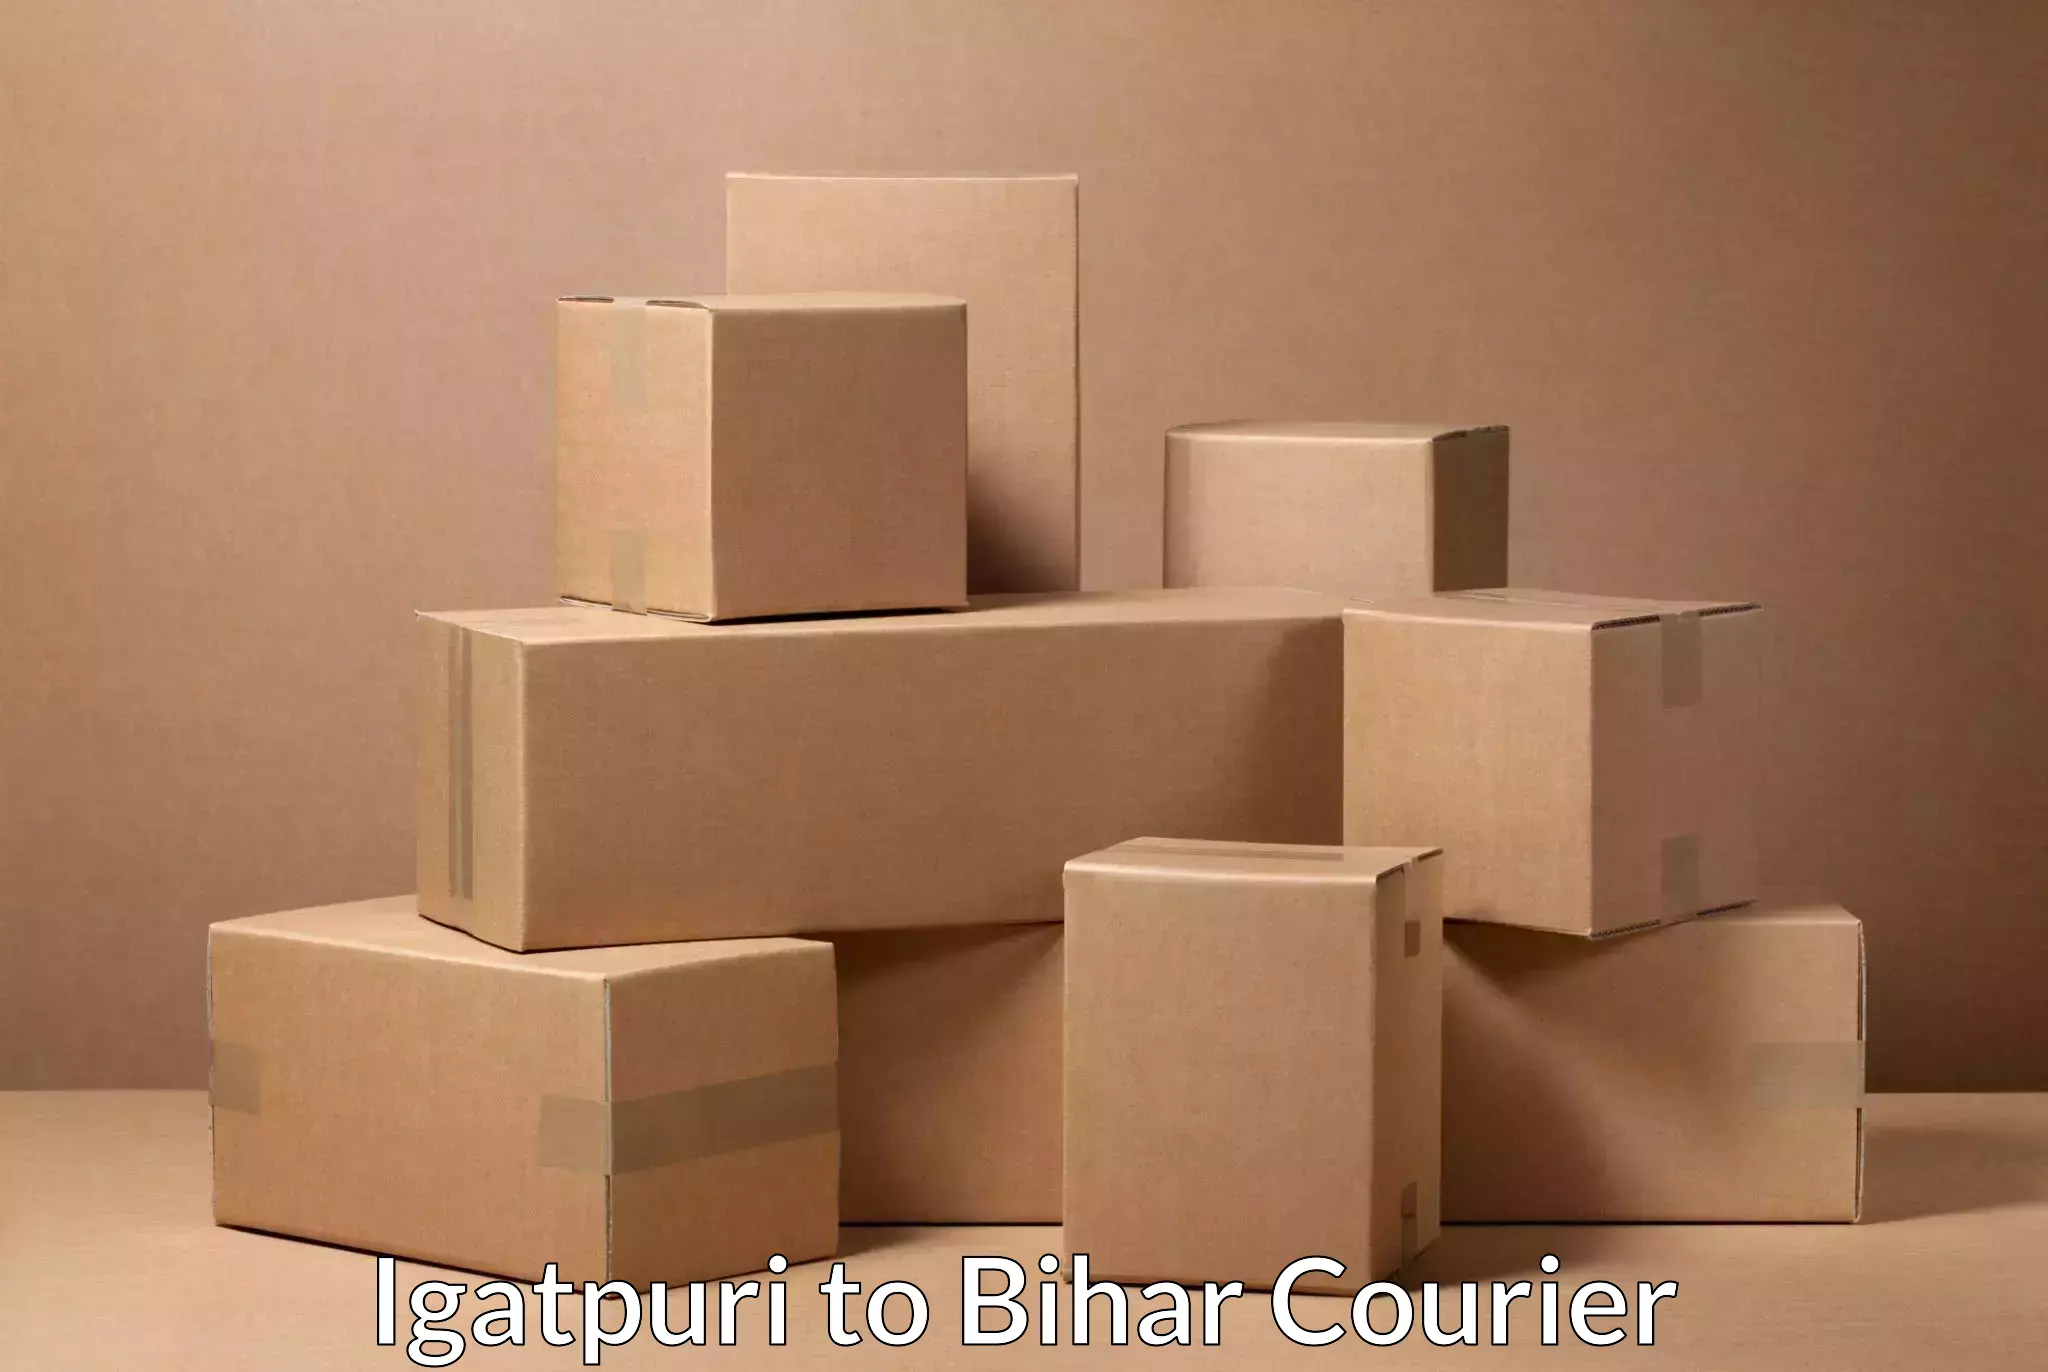 Air courier services in Igatpuri to Sahebpur Kamal